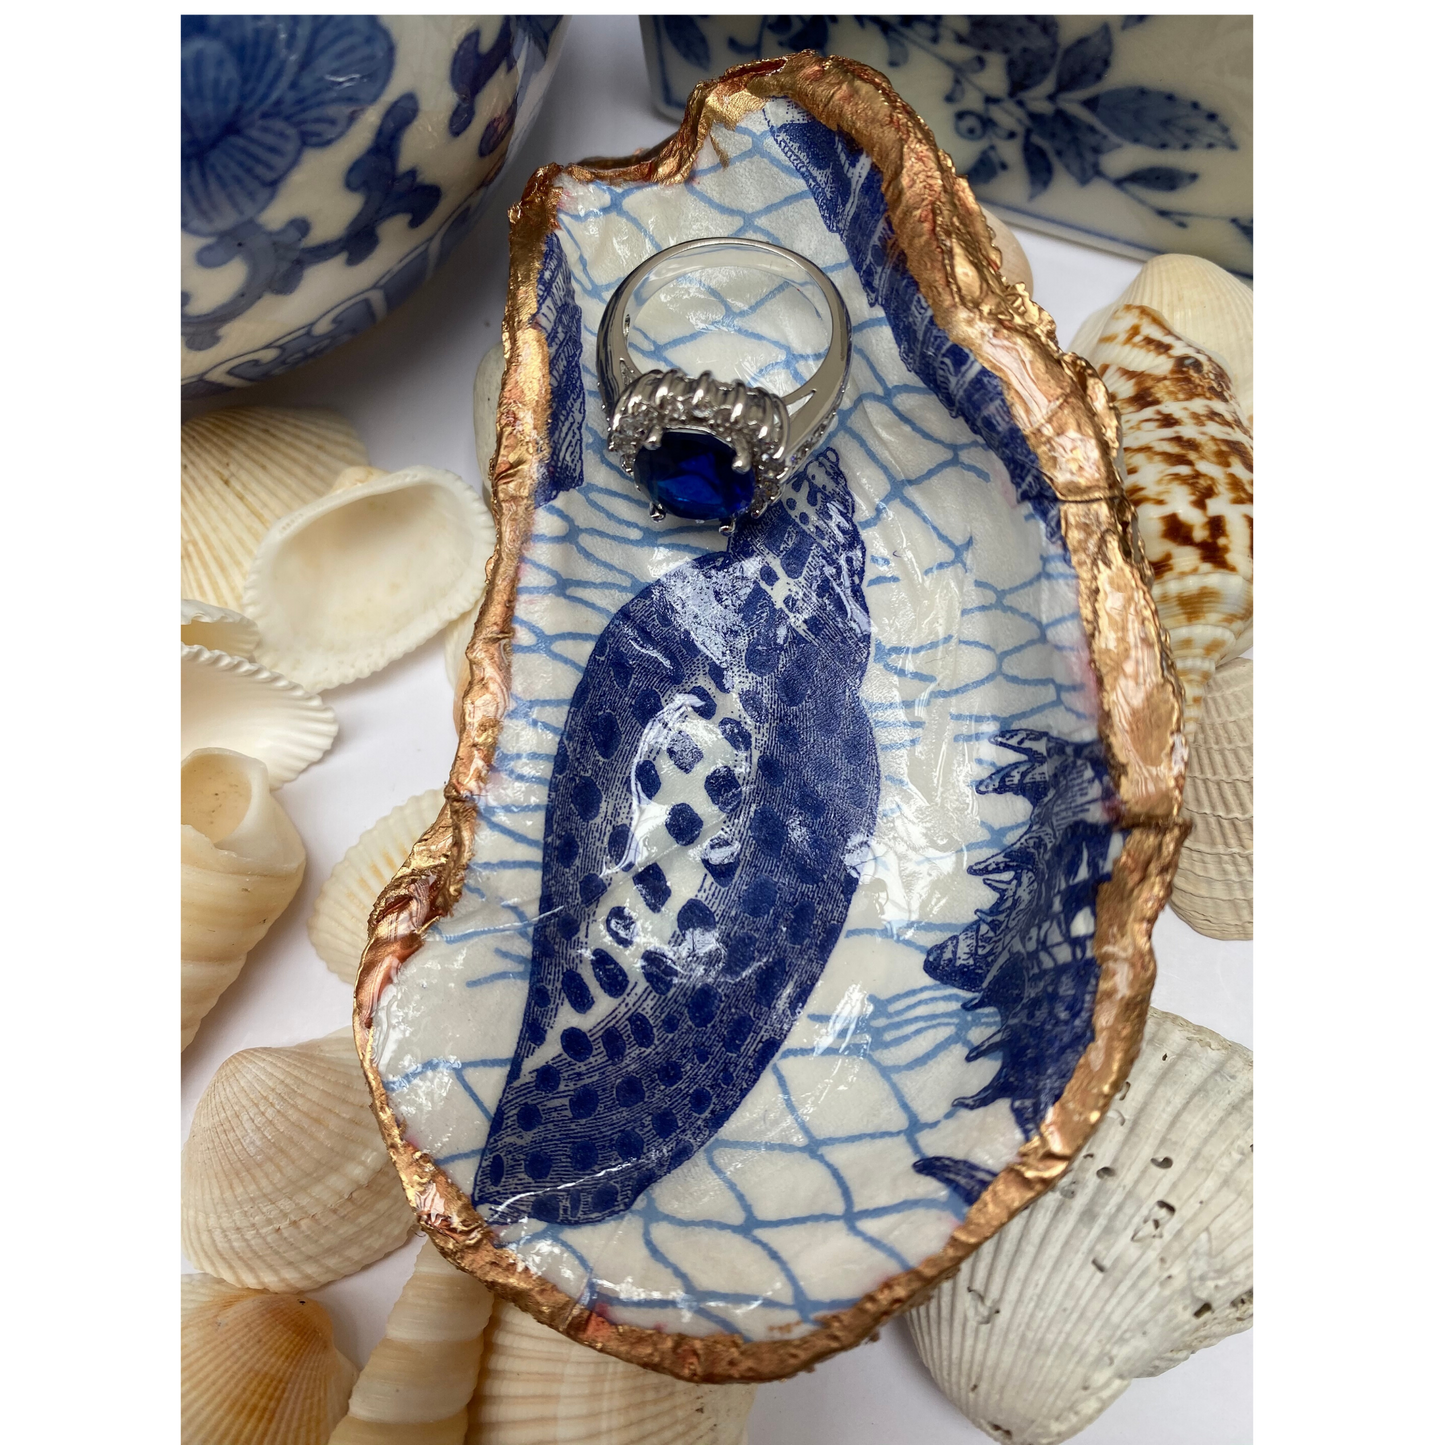 Oyster Shell Art, Sea Shell, Blue and White Hostess Gift